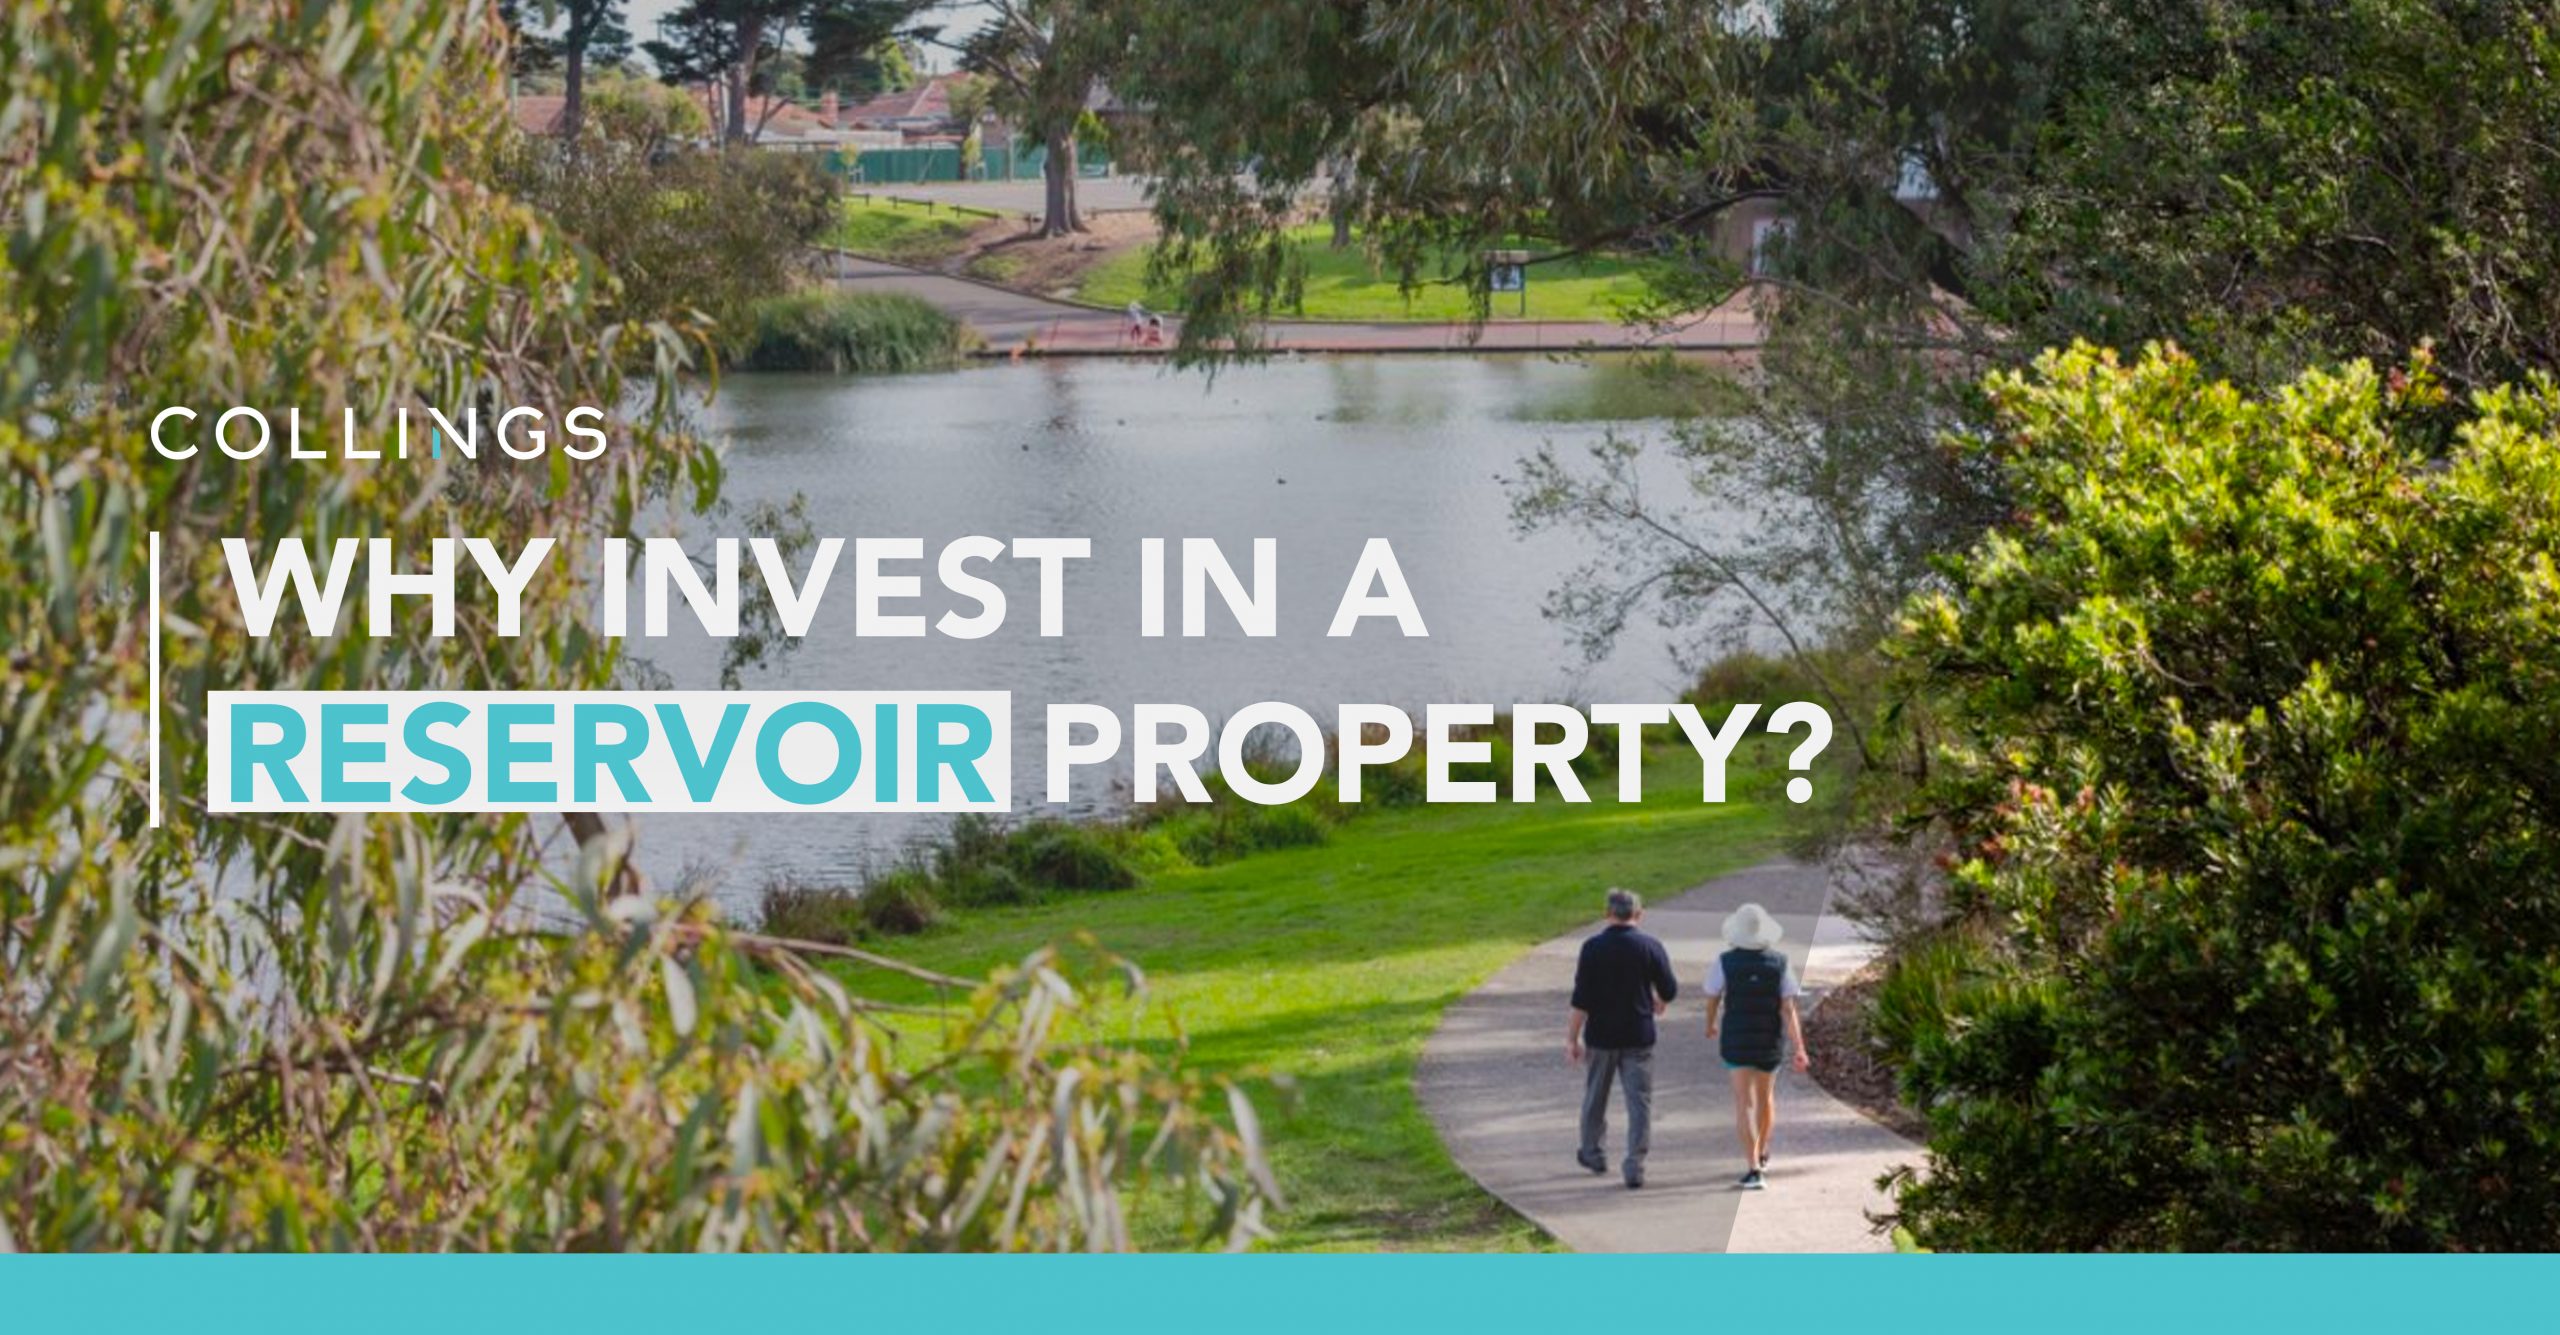 Why invest in a Reservoir Property?